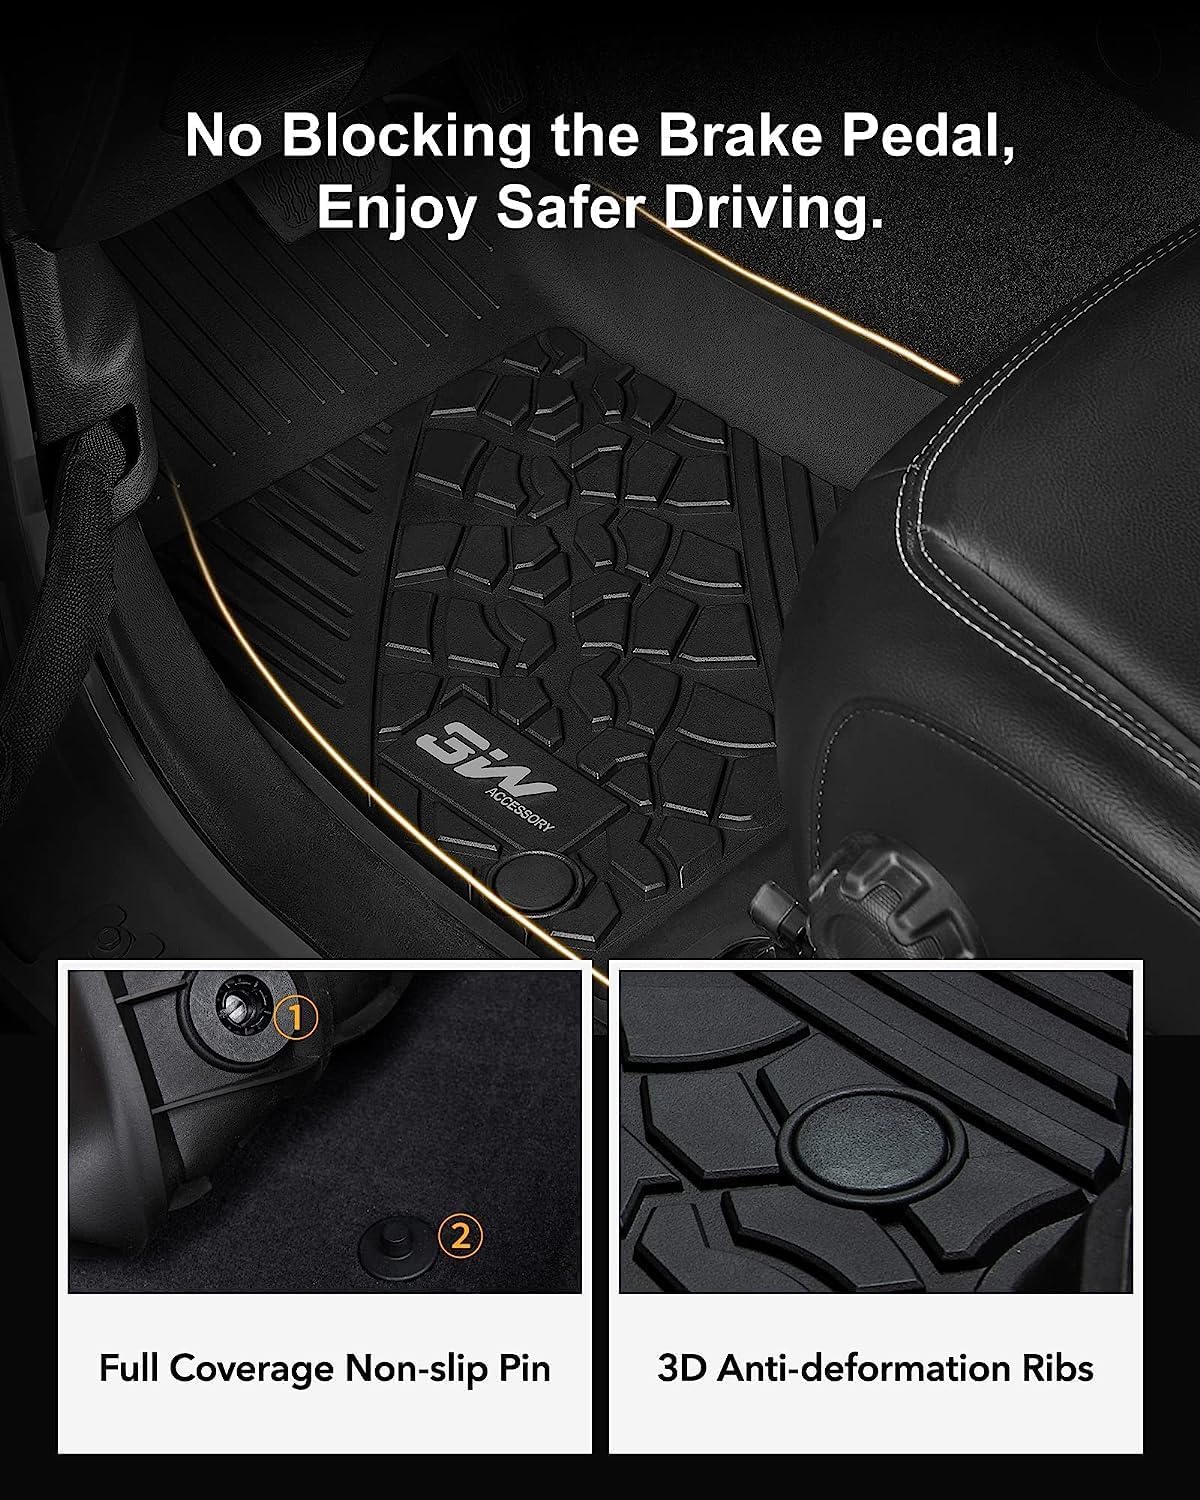 3W Floor Mats&amp;Cargo Liner Fit for Jeep Wrangler JL 2018-2024 Unlimited 4-Door with Subwoofer (Non JK or 4XE) All-Weather TPE Floor Liner for 1st, 2nd Row and Trunk Full Set Car Mats,Black